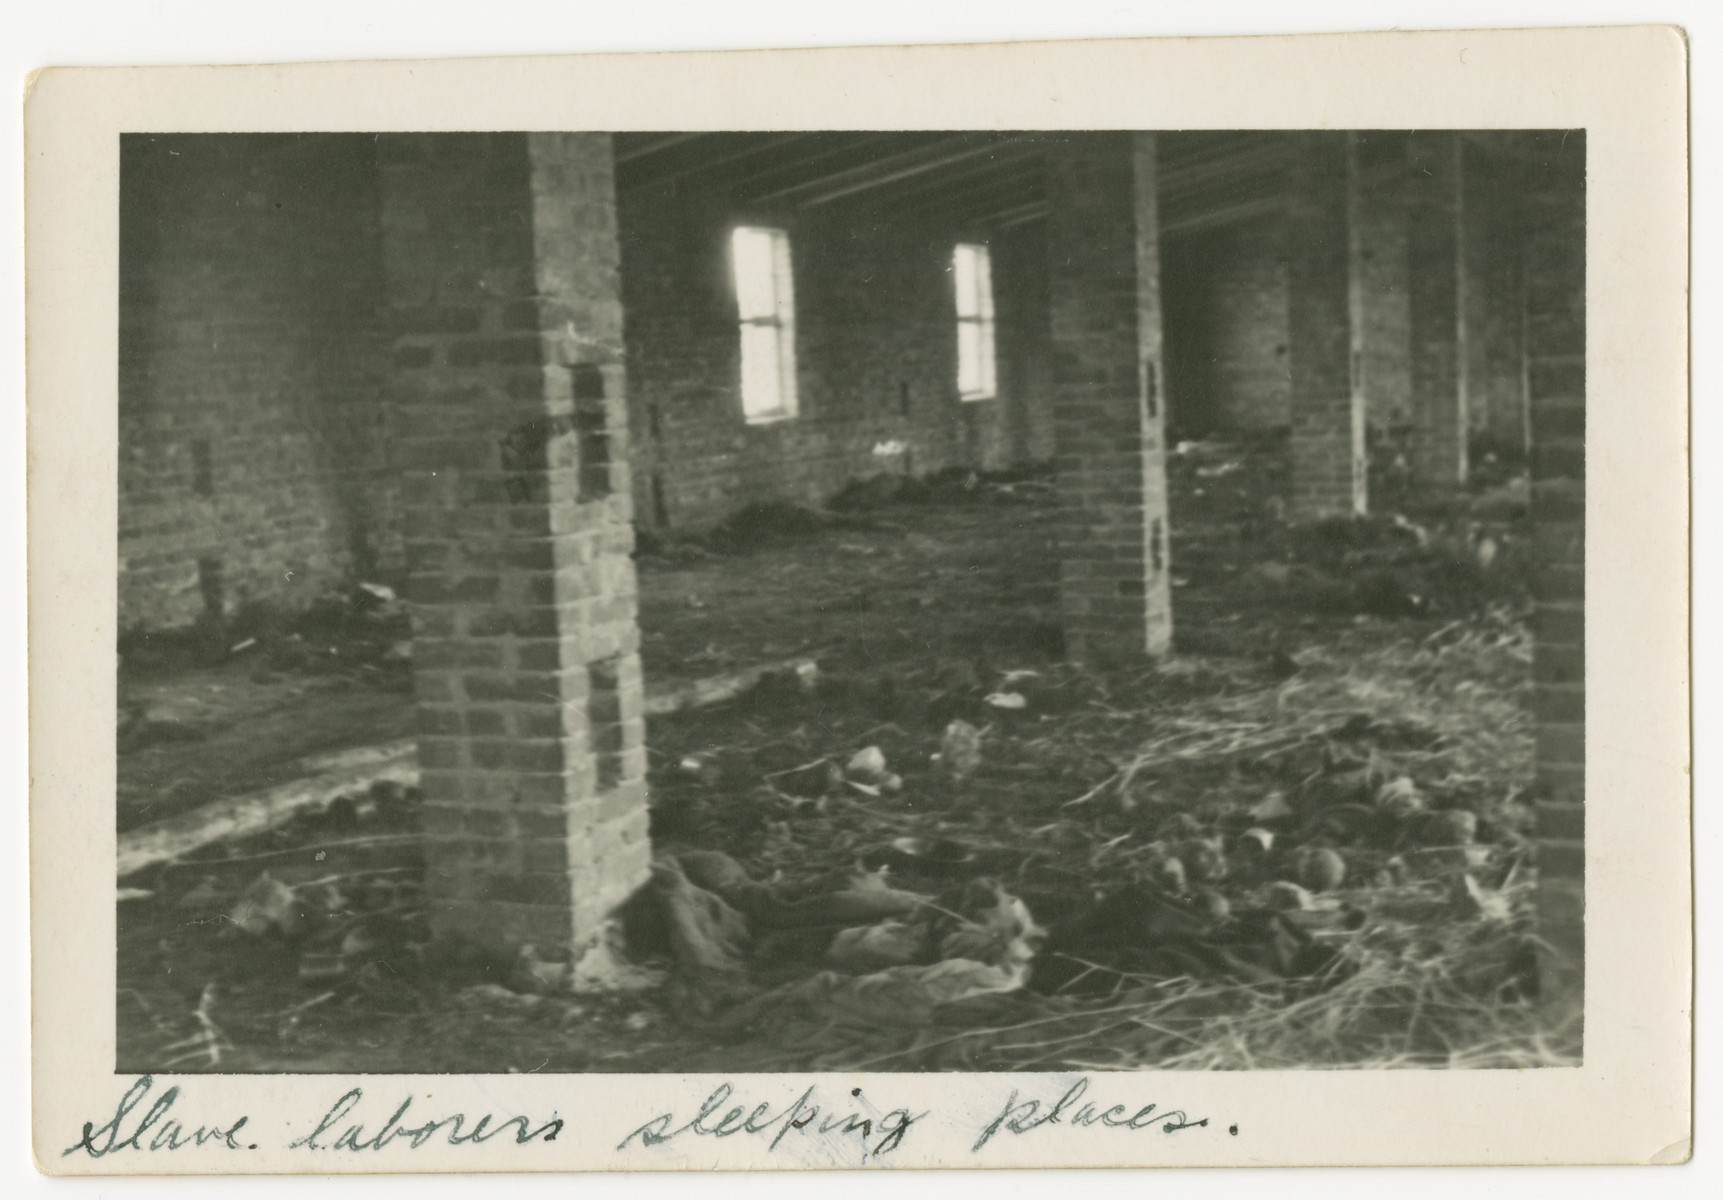 An interior view of the sleeping quarters for the slave laborers at the Woebbelin concentration camp.

The photograph's original caption reads, "Slave laborers sleeping places."